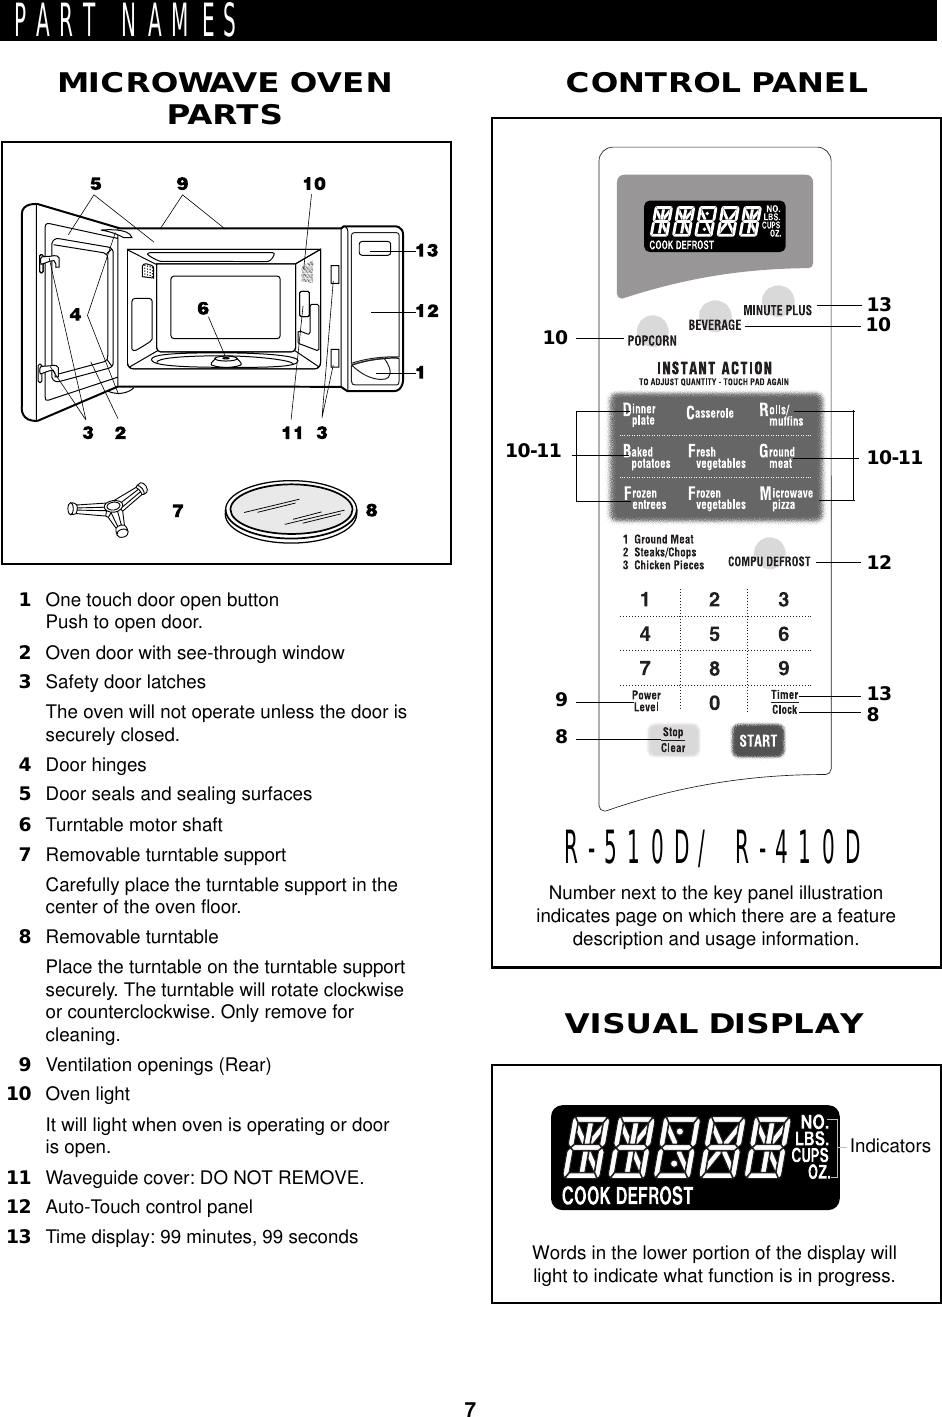 7PART NAMES1One touch door open buttonPush to open door.2Oven door with see-through window3Safety door latchesThe oven will not operate unless the door issecurely closed.4Door hinges5Door seals and sealing surfaces6Turntable motor shaft7Removable turntable supportCarefully place the turntable support in thecenter of the oven floor.8Removable turntablePlace the turntable on the turntable supportsecurely. The turntable will rotate clockwiseor counterclockwise. Only remove forcleaning.9Ventilation openings (Rear)10Oven lightIt will light when oven is operating or dooris open.11Waveguide cover: DO NOT REMOVE.12Auto-Touch control panel13Time display: 99 minutes, 99 secondsMICROWAVE OVENPARTSNumber next to the key panel illustrationindicates page on which there are a featuredescription and usage information.R-510D/ R-410DCONTROL PANELVISUAL DISPLAYWords in the lower portion of the display willlight to indicate what function is in progress.Indicators10-11139810-11121381010